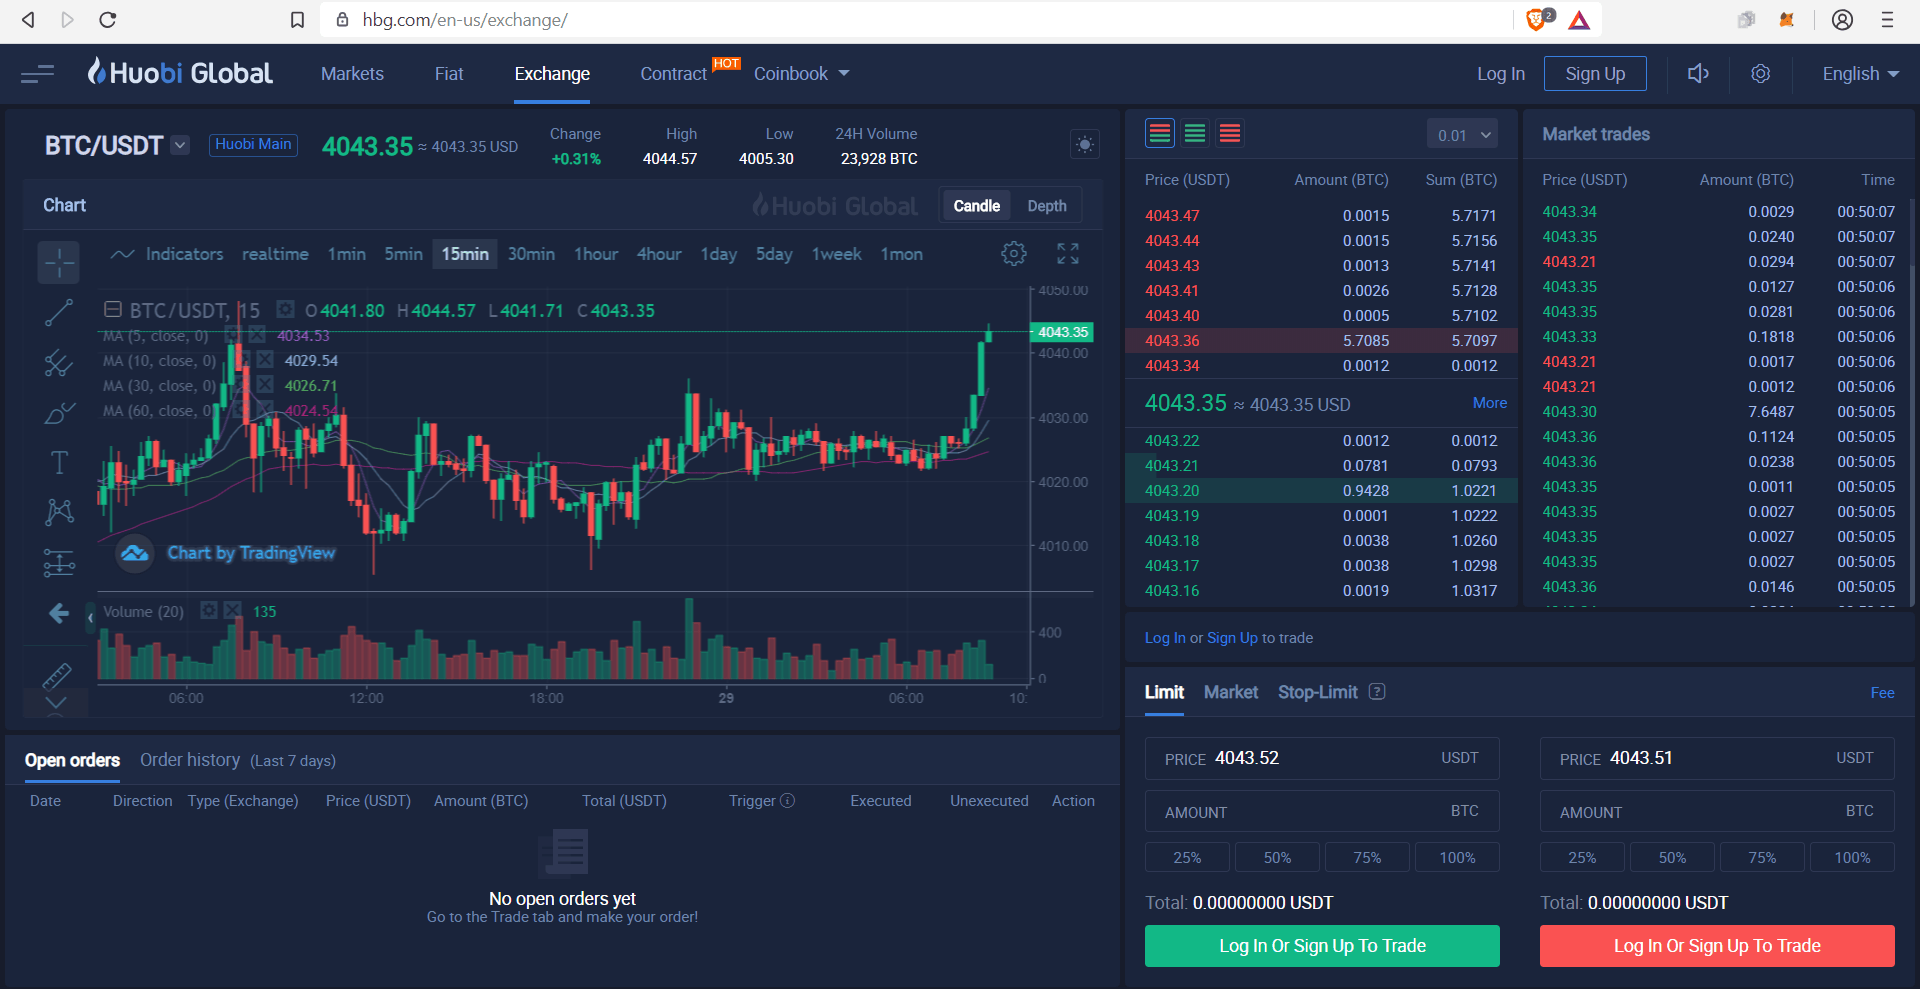 The Huobi Global exchange has one of the cleanest and most professional exchange UI’s in the industry.